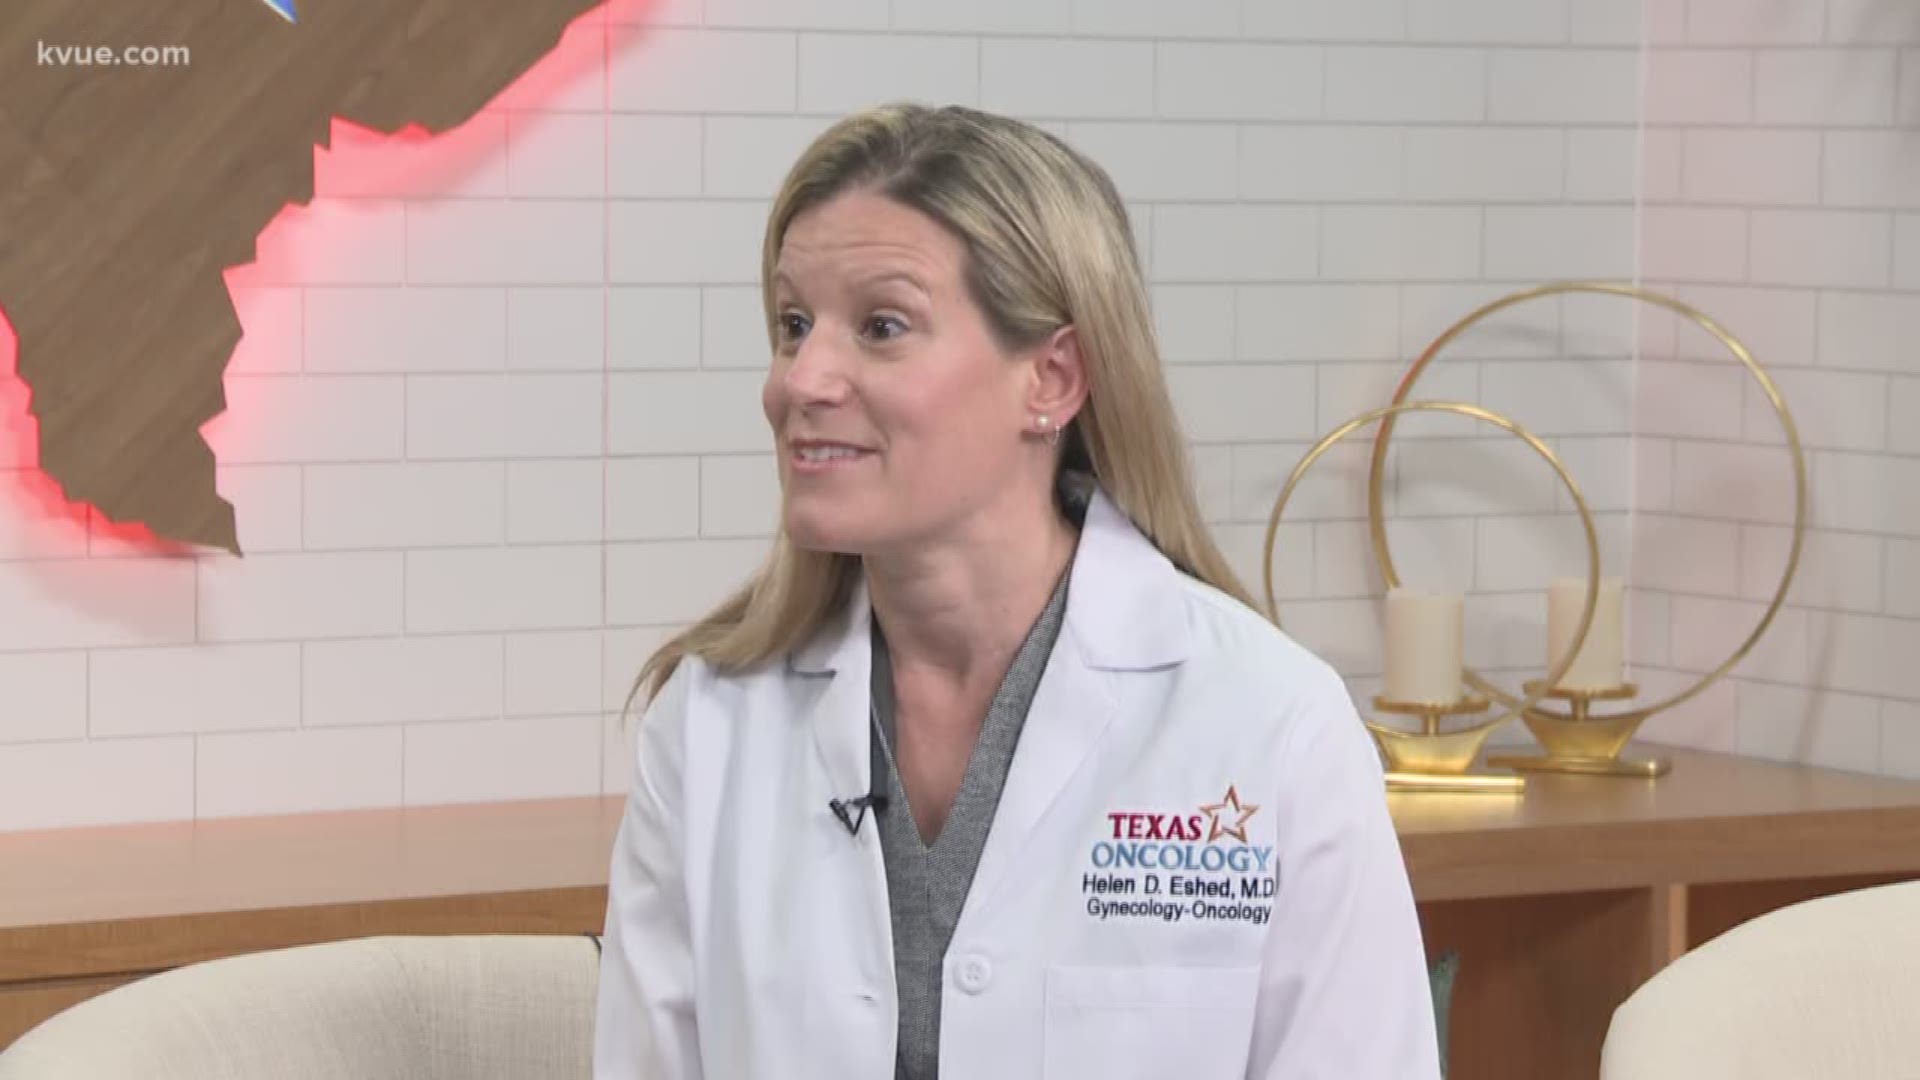 As obesity rates continue to rise across the U.S. it seems the rate of cancers connected to excess weight gain are climbing, too. Dr. Helen Eshed, a gynecologic oncologist with St. David's South Austin Medical Center and Texas Oncology joins us now to tell us about this new study.